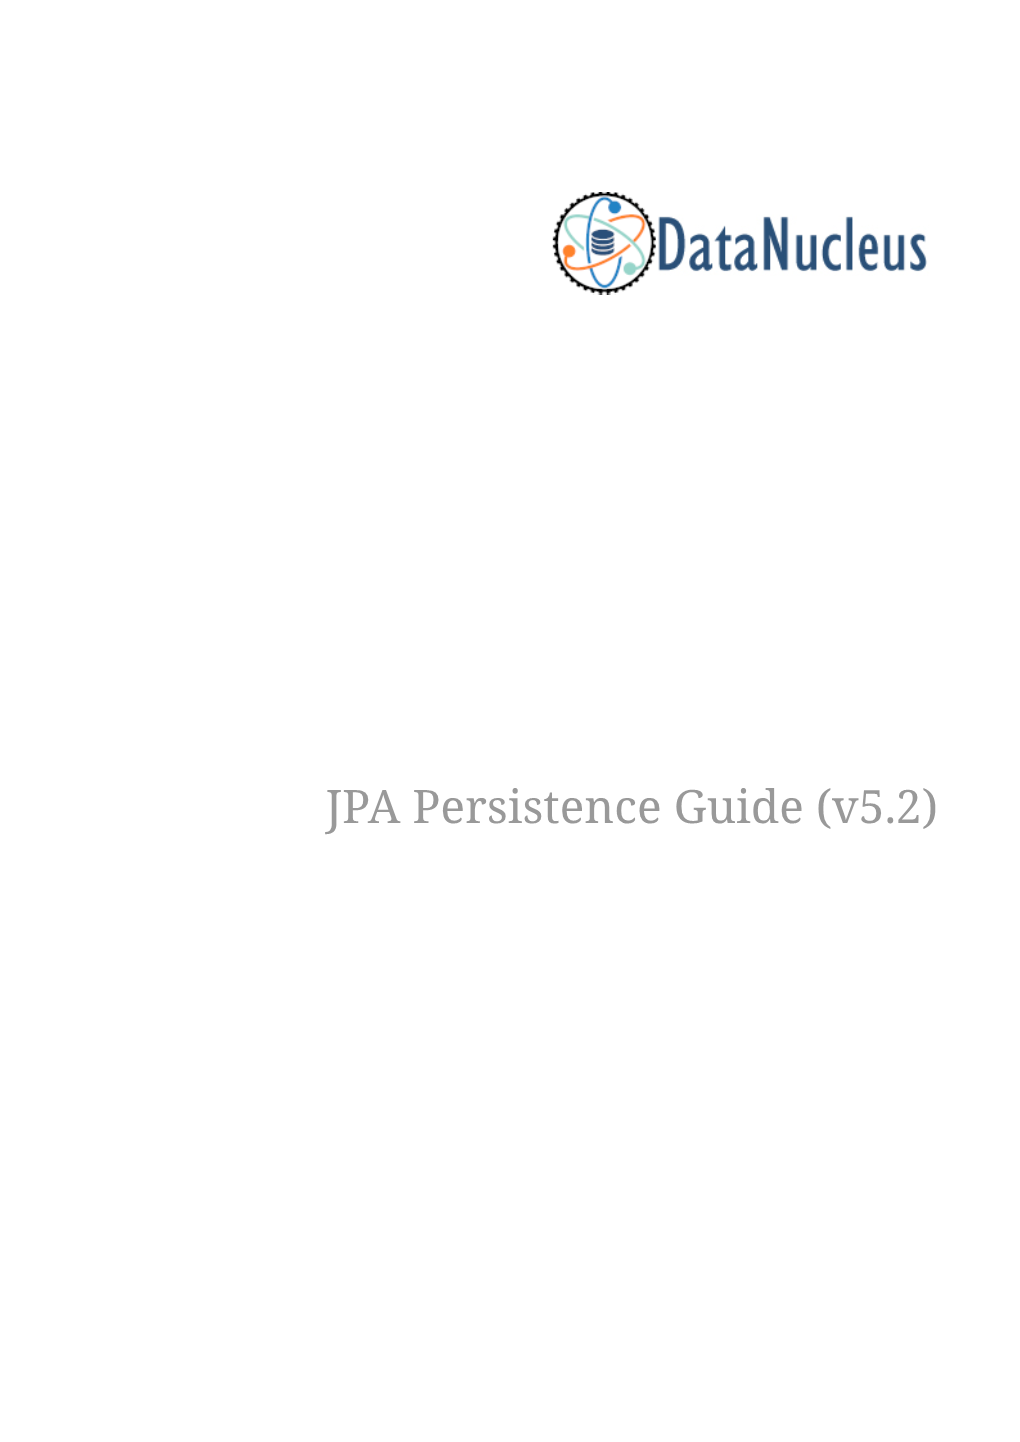 JPA Persistence Guide (V5.2) Table of Contents